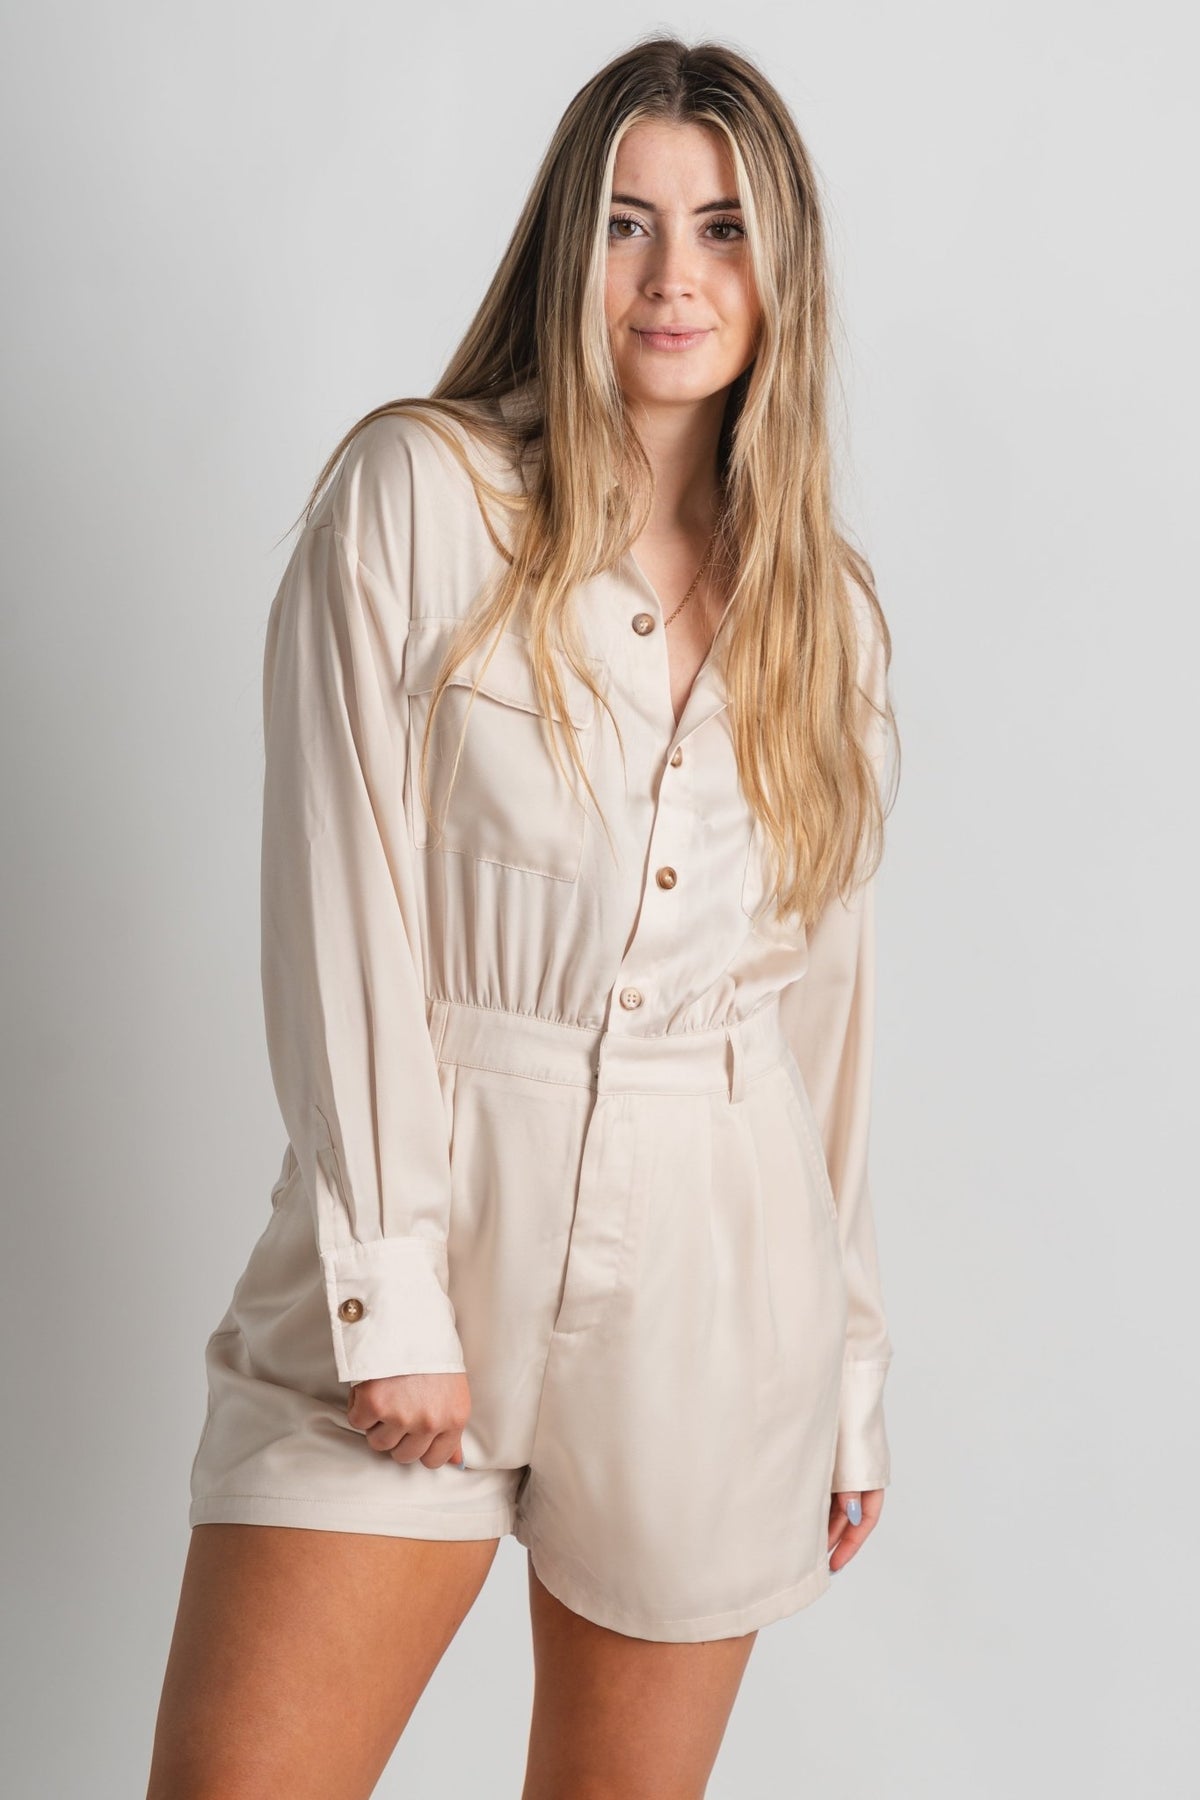 Pocket front blouse romper champagne - Cute Romper - Trendy Rompers and Pantsuits at Lush Fashion Lounge Boutique in Oklahoma City